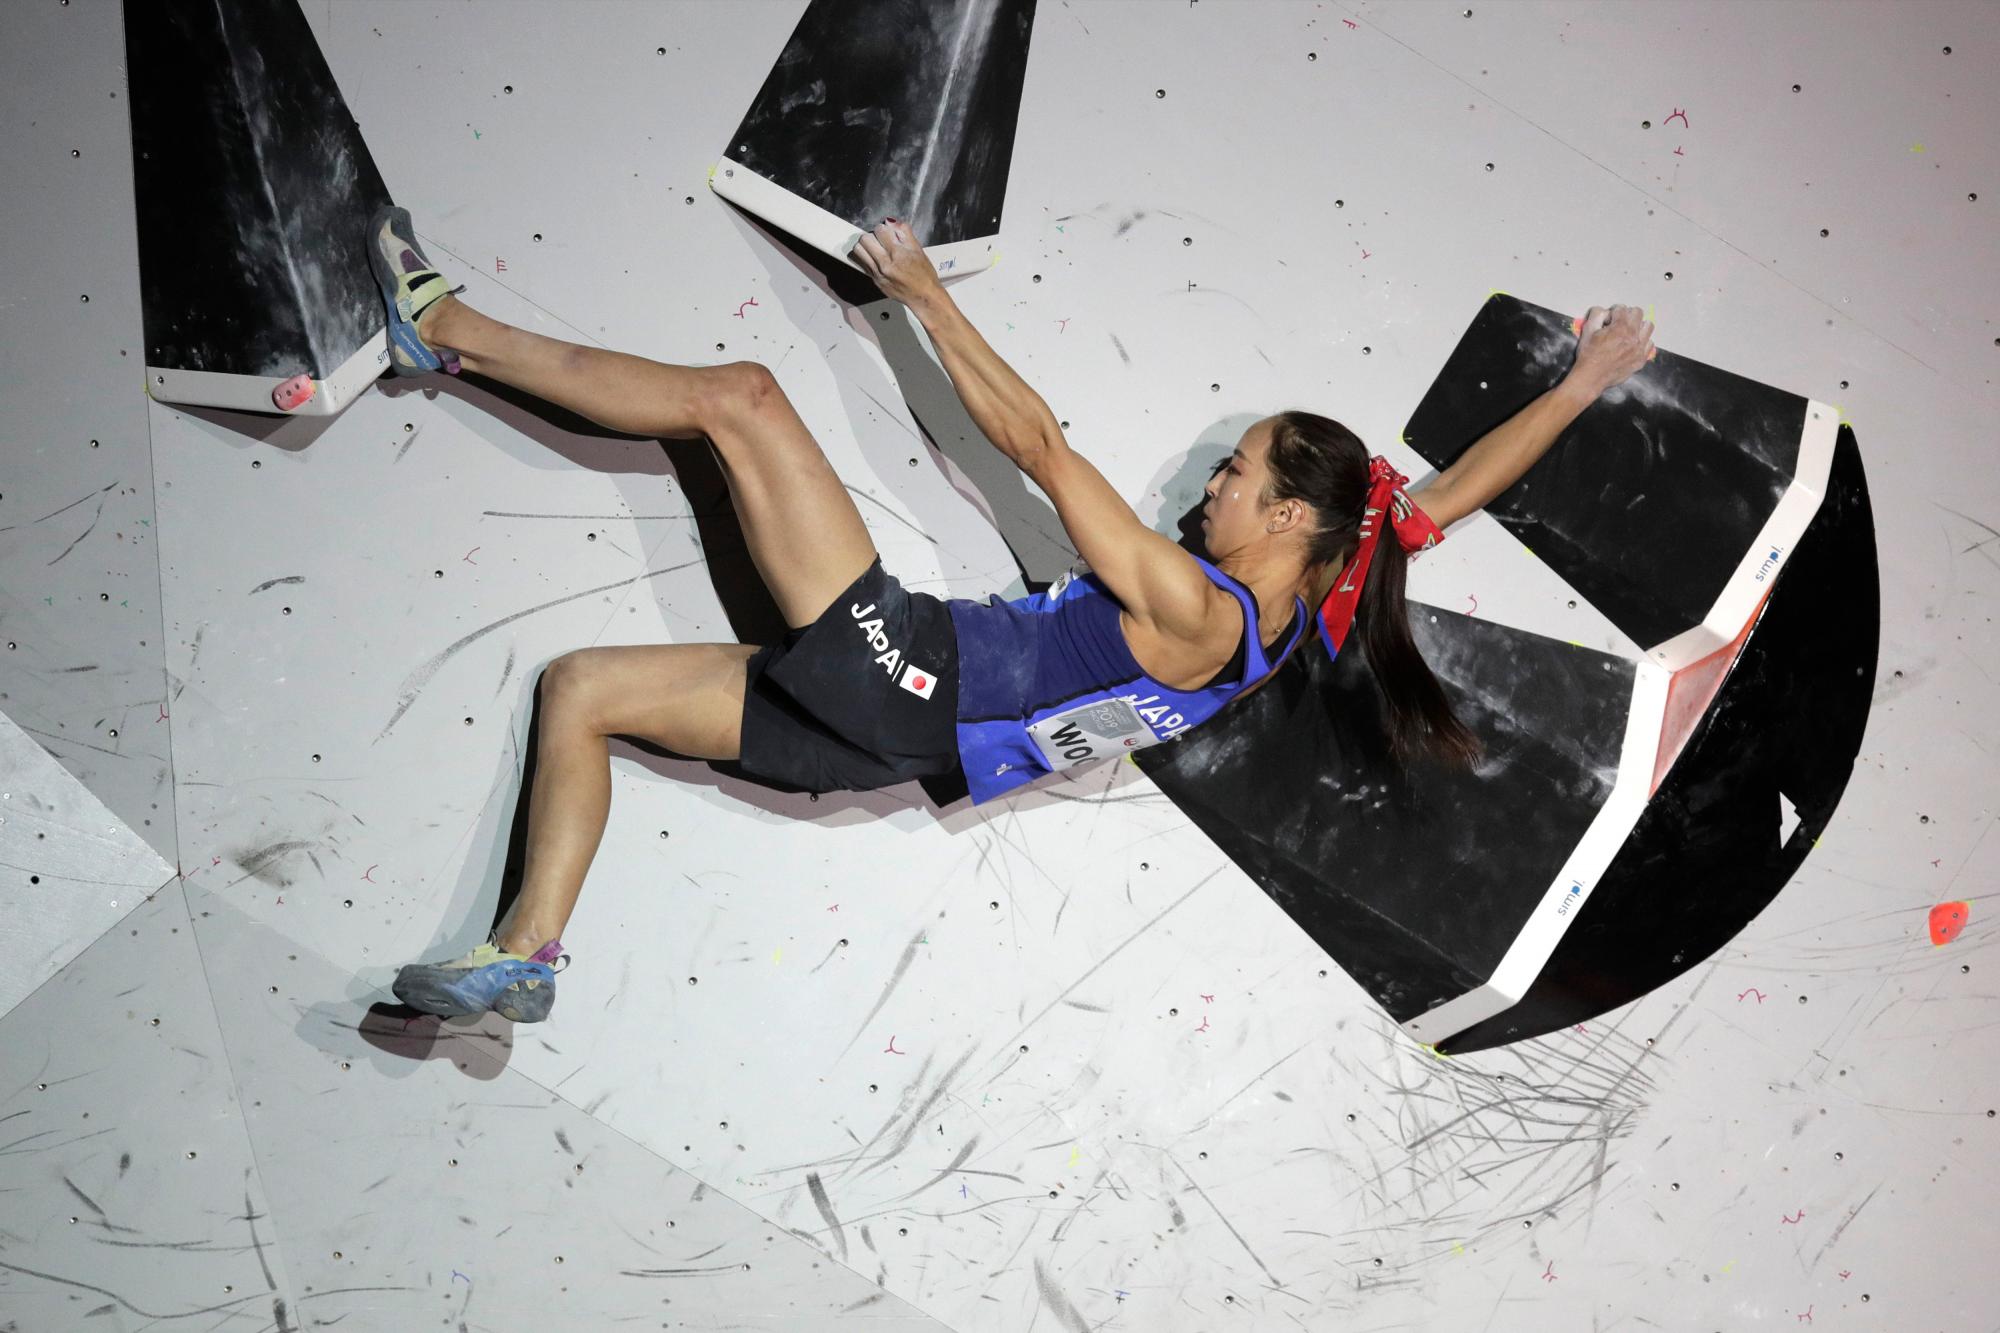 Akiyo Noguchi, of Japan, competes during the womens combined bouldering final at the International Federation of Sport Climbing World Championships Tuesday, Aug. 20, 2019, in Tokyo. (AP Photo/Jae C. Hong)